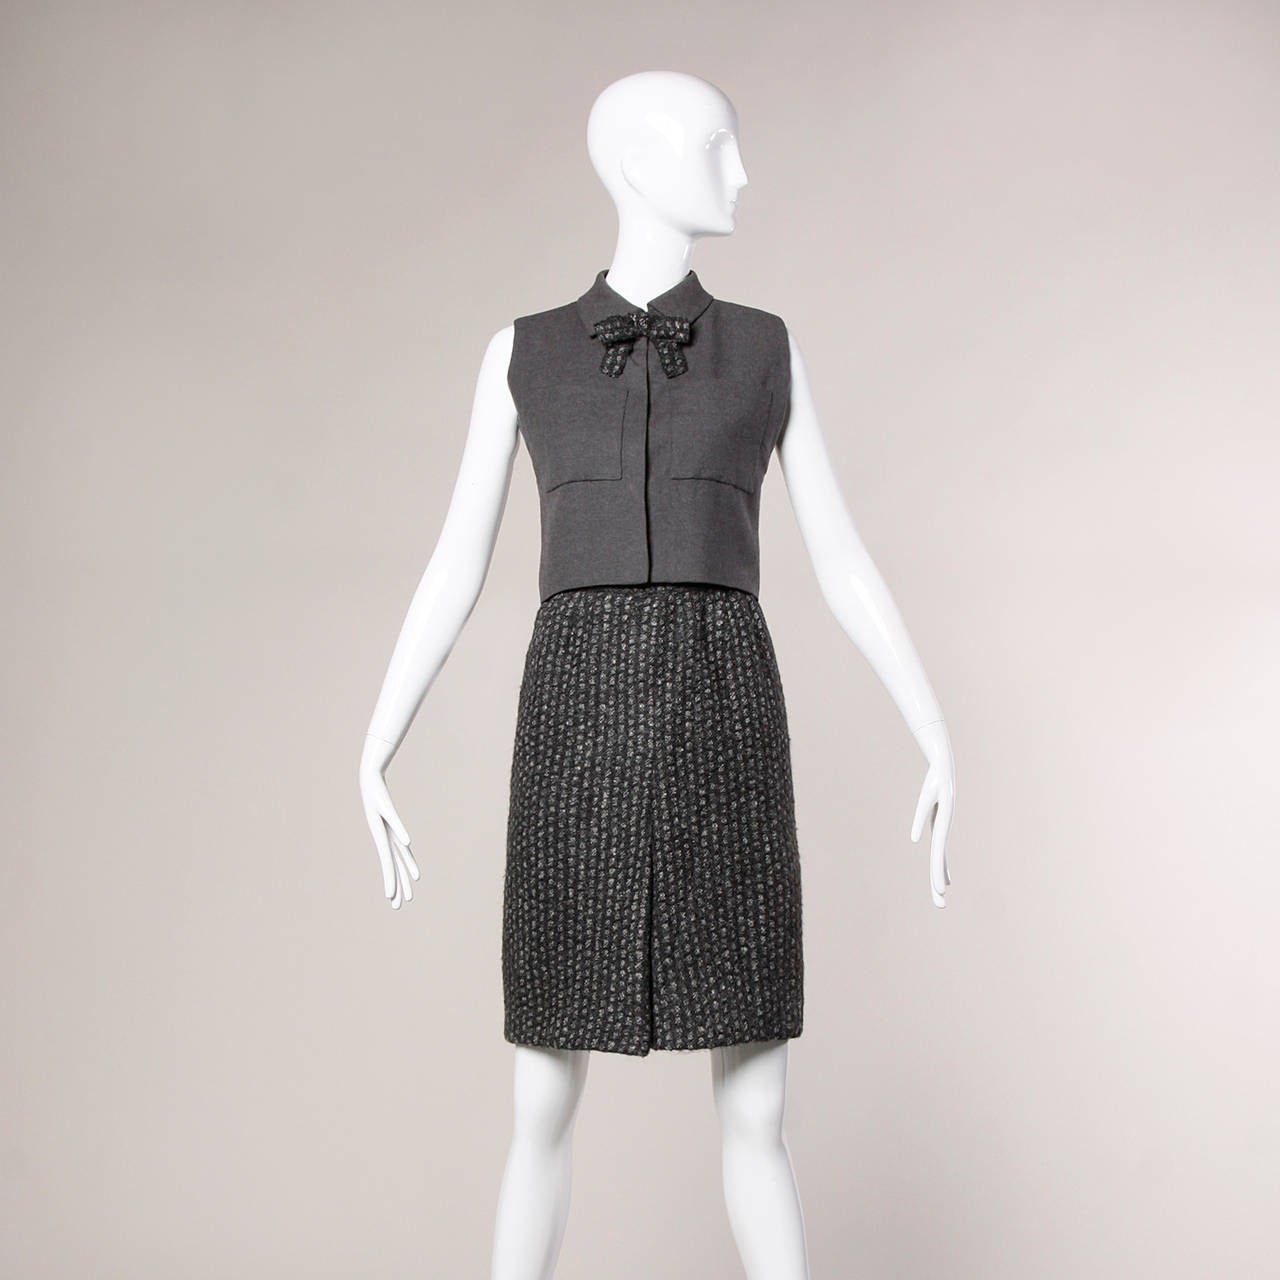 Absolutely stunning 1960s Italian couture skirt suit featuring a shell top, skirt, jacket and ascot bow tie that can be worn together or separately. Karl Lagerfeld designed for this Italian couture house and this ensemble was likely one of his early